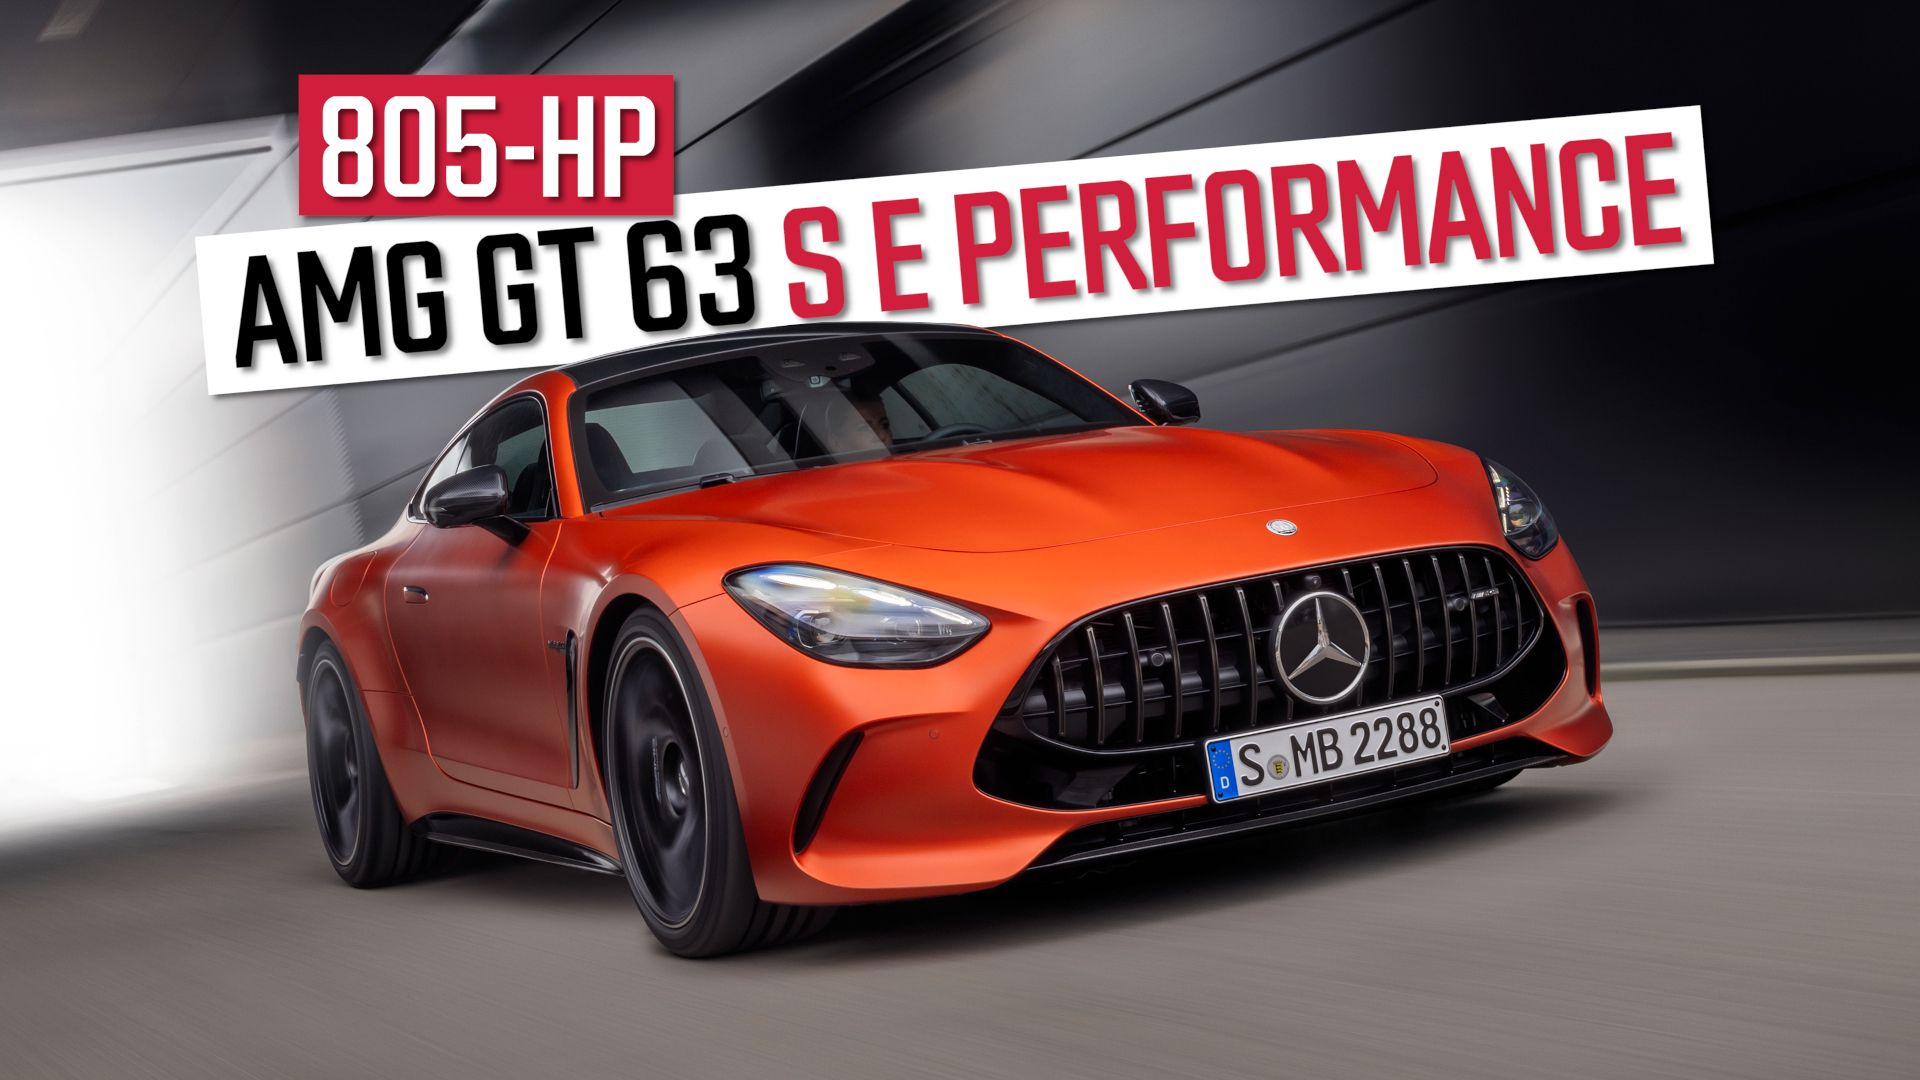 AMG GT 63 E Performance Feature